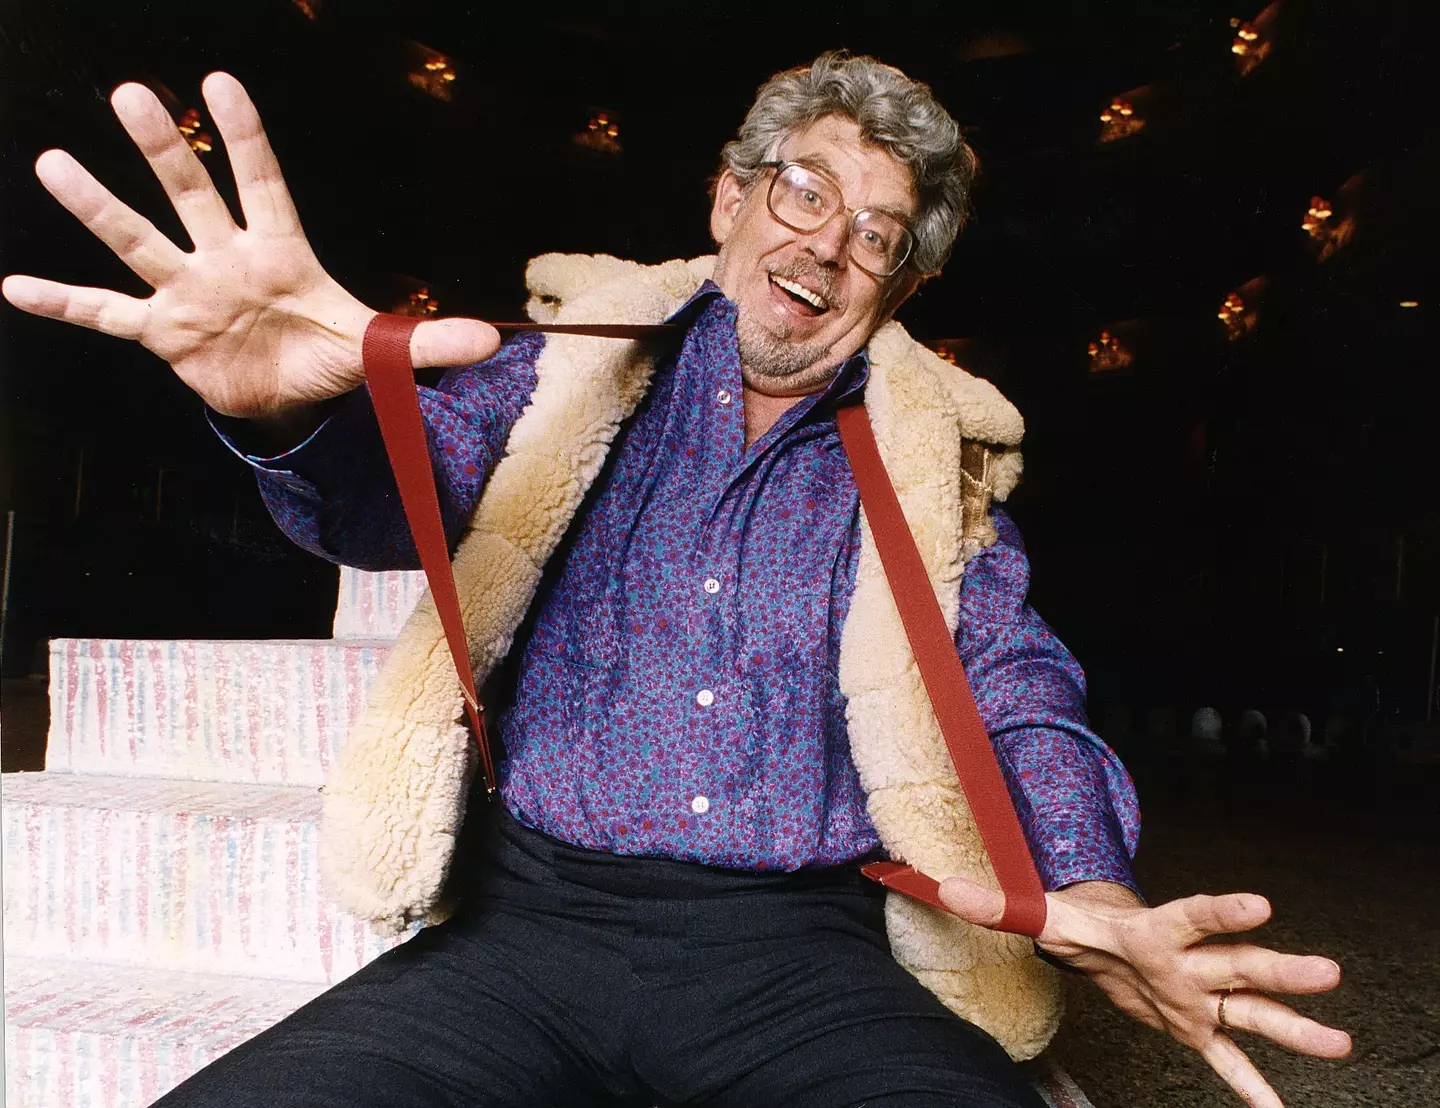 Rolf Harris was a convicted sex offender and paedophile.